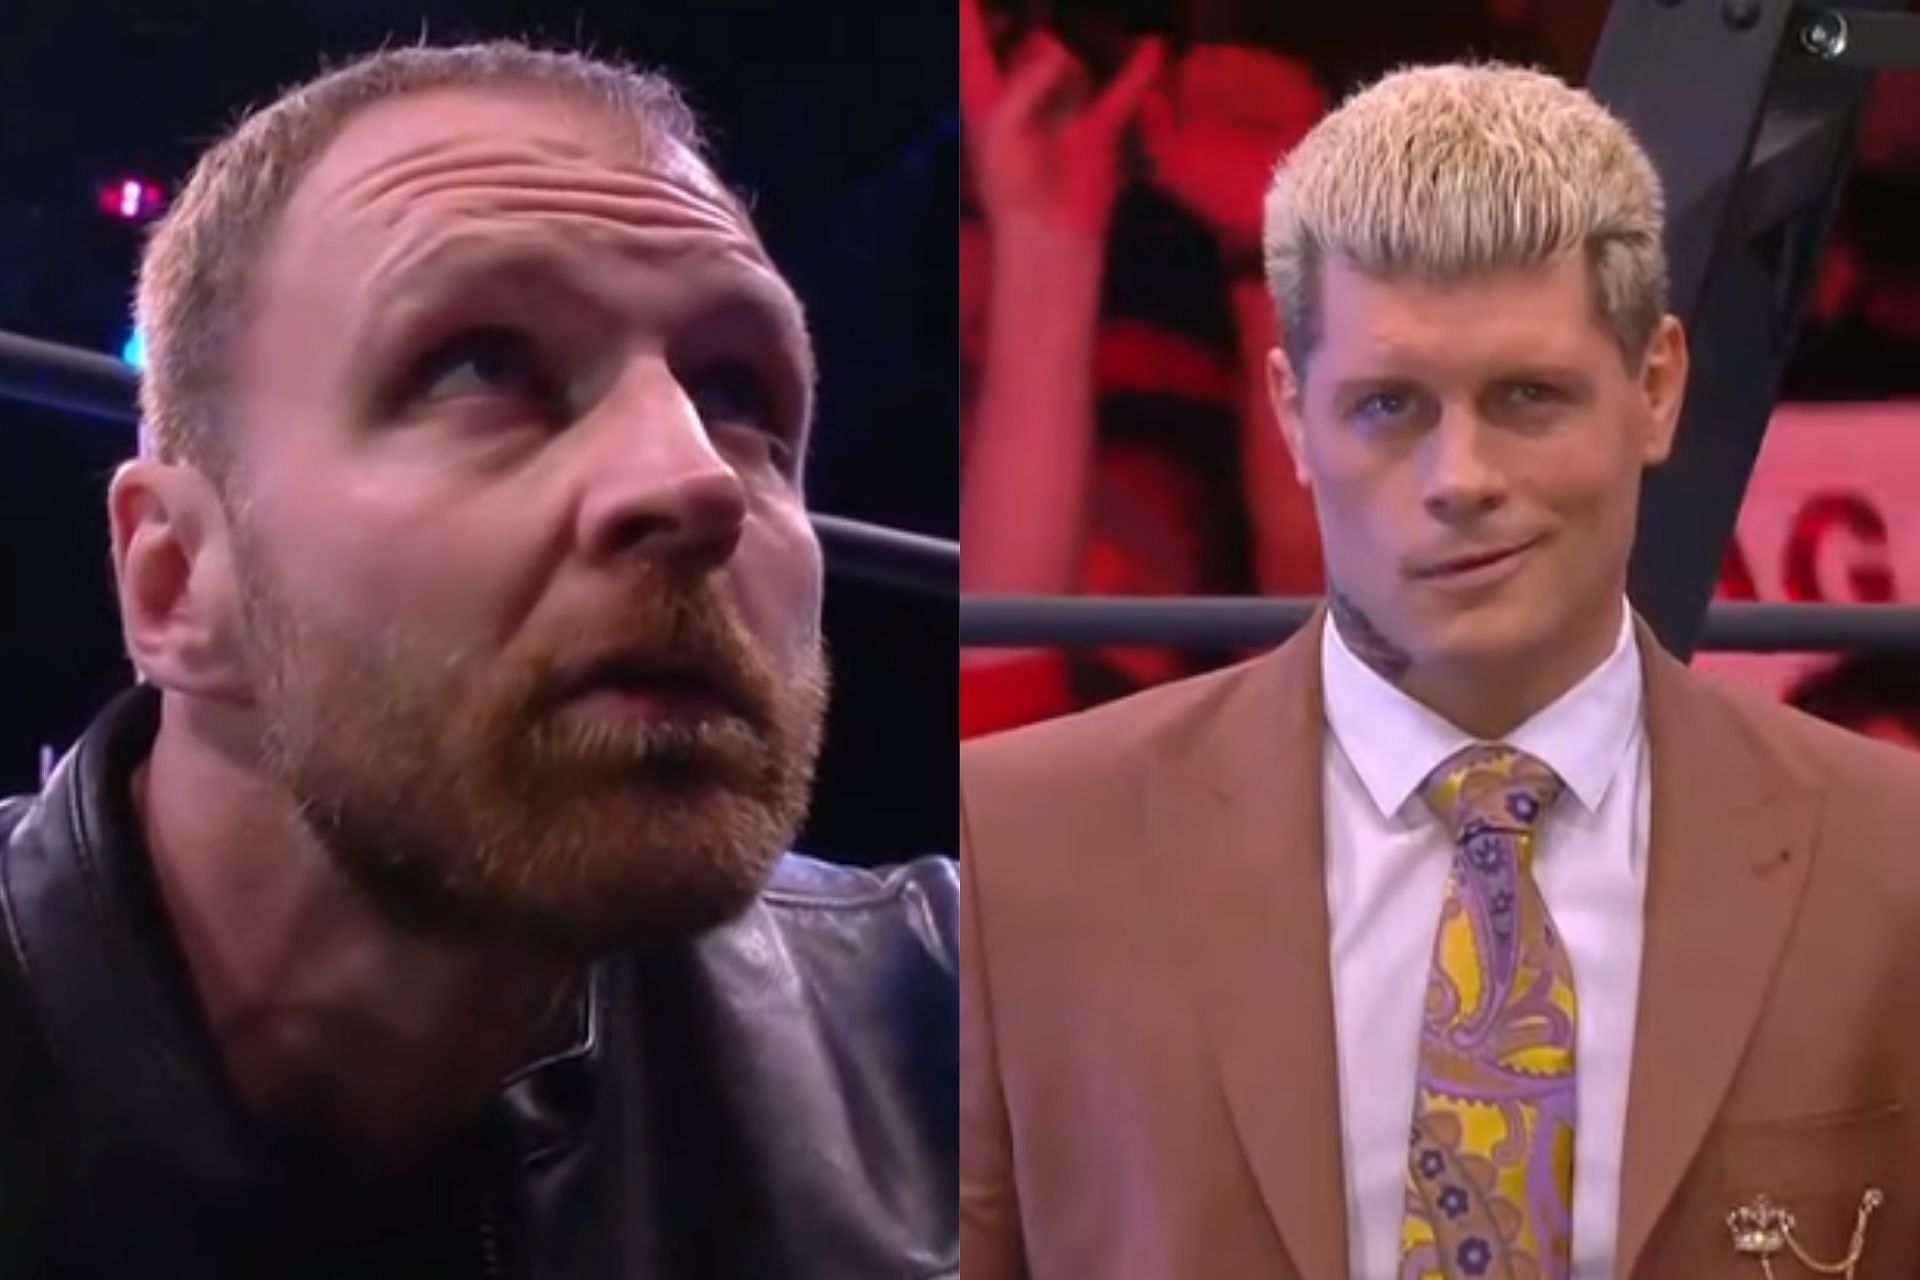 Mox and Cody made their much-anticipated returns on AEW Dynamite